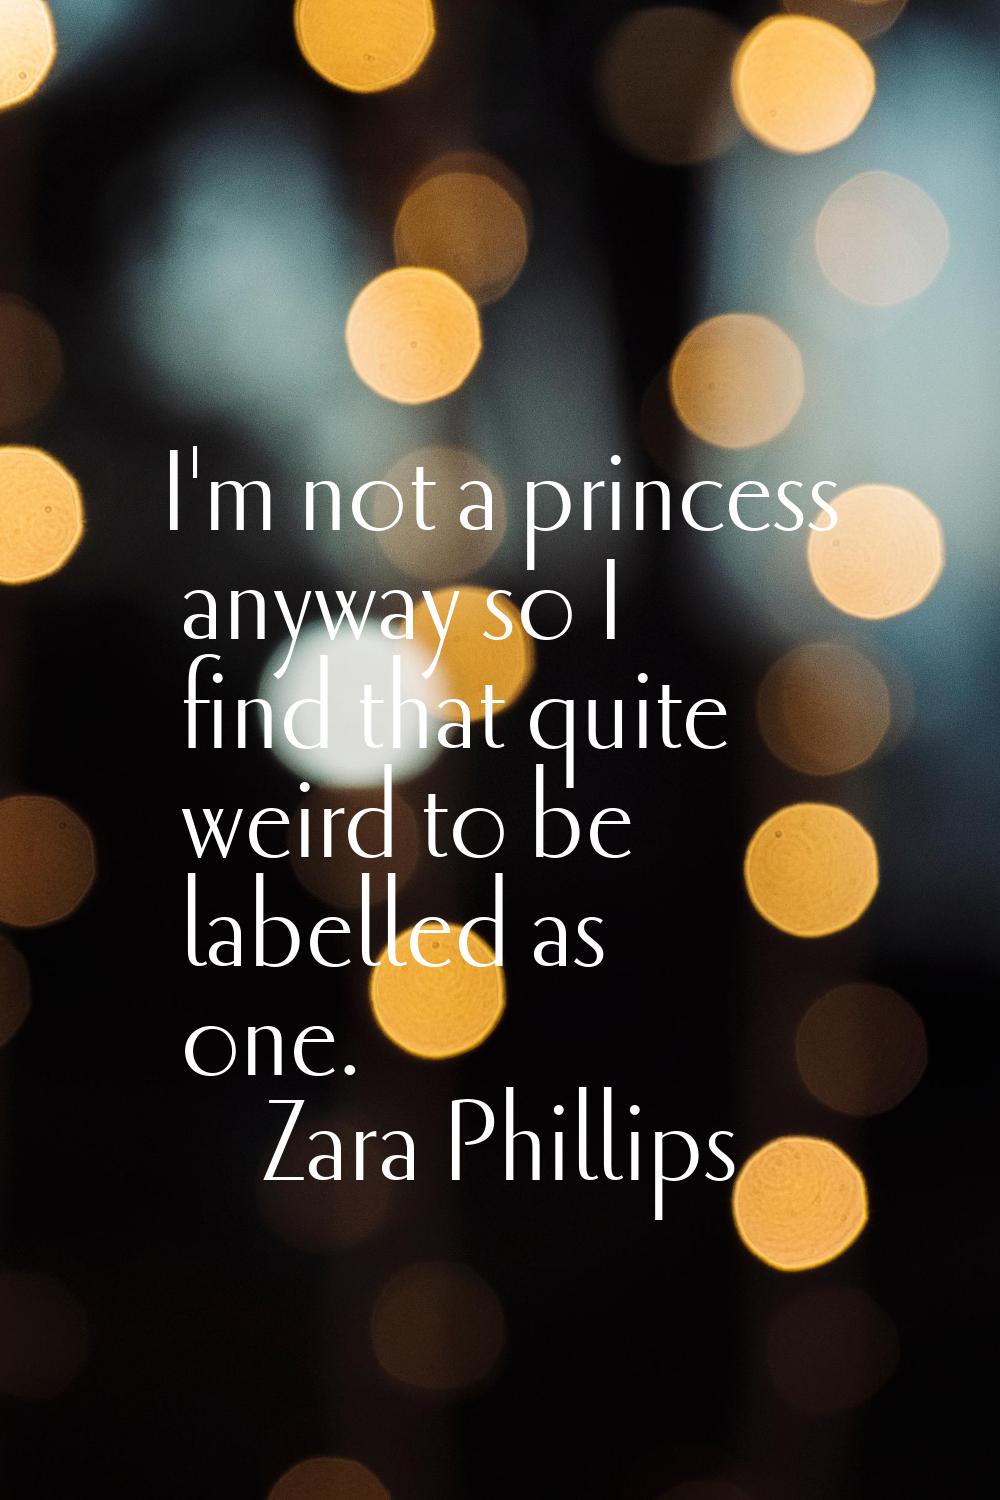 I'm not a princess anyway so I find that quite weird to be labelled as one.